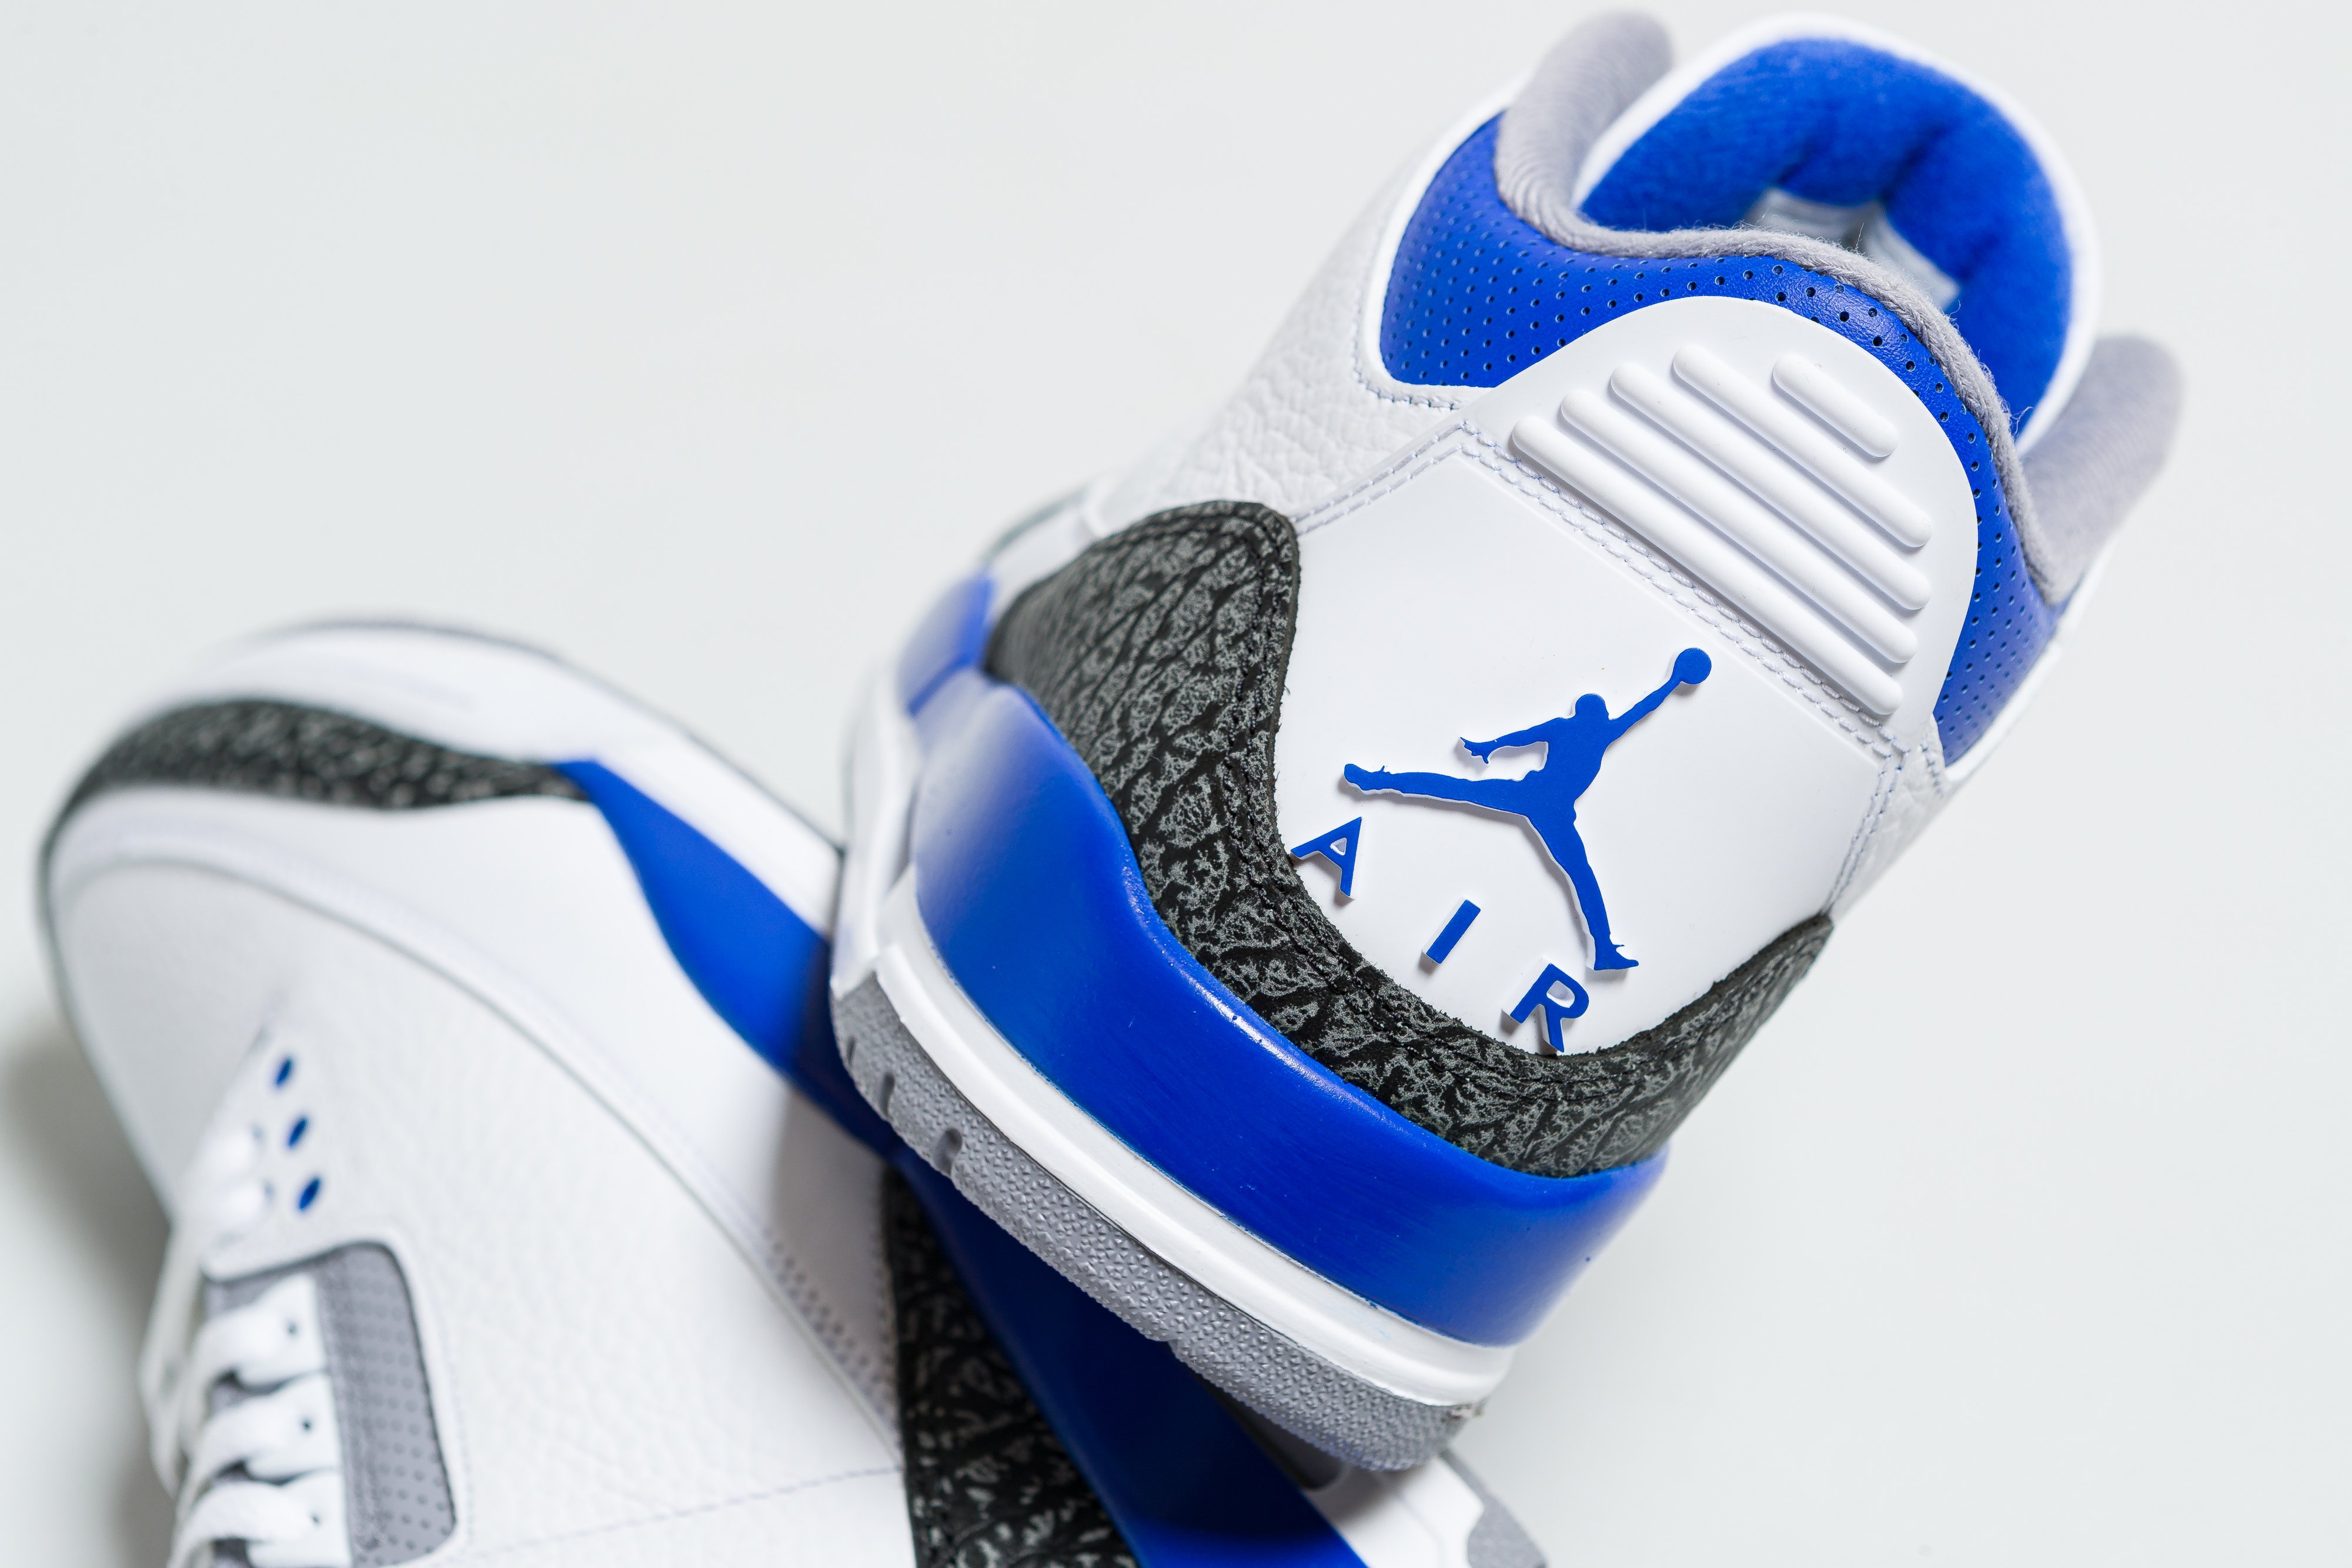 Up There Launches - Nike Air Jordan 3 Retro 'Racer Blue'